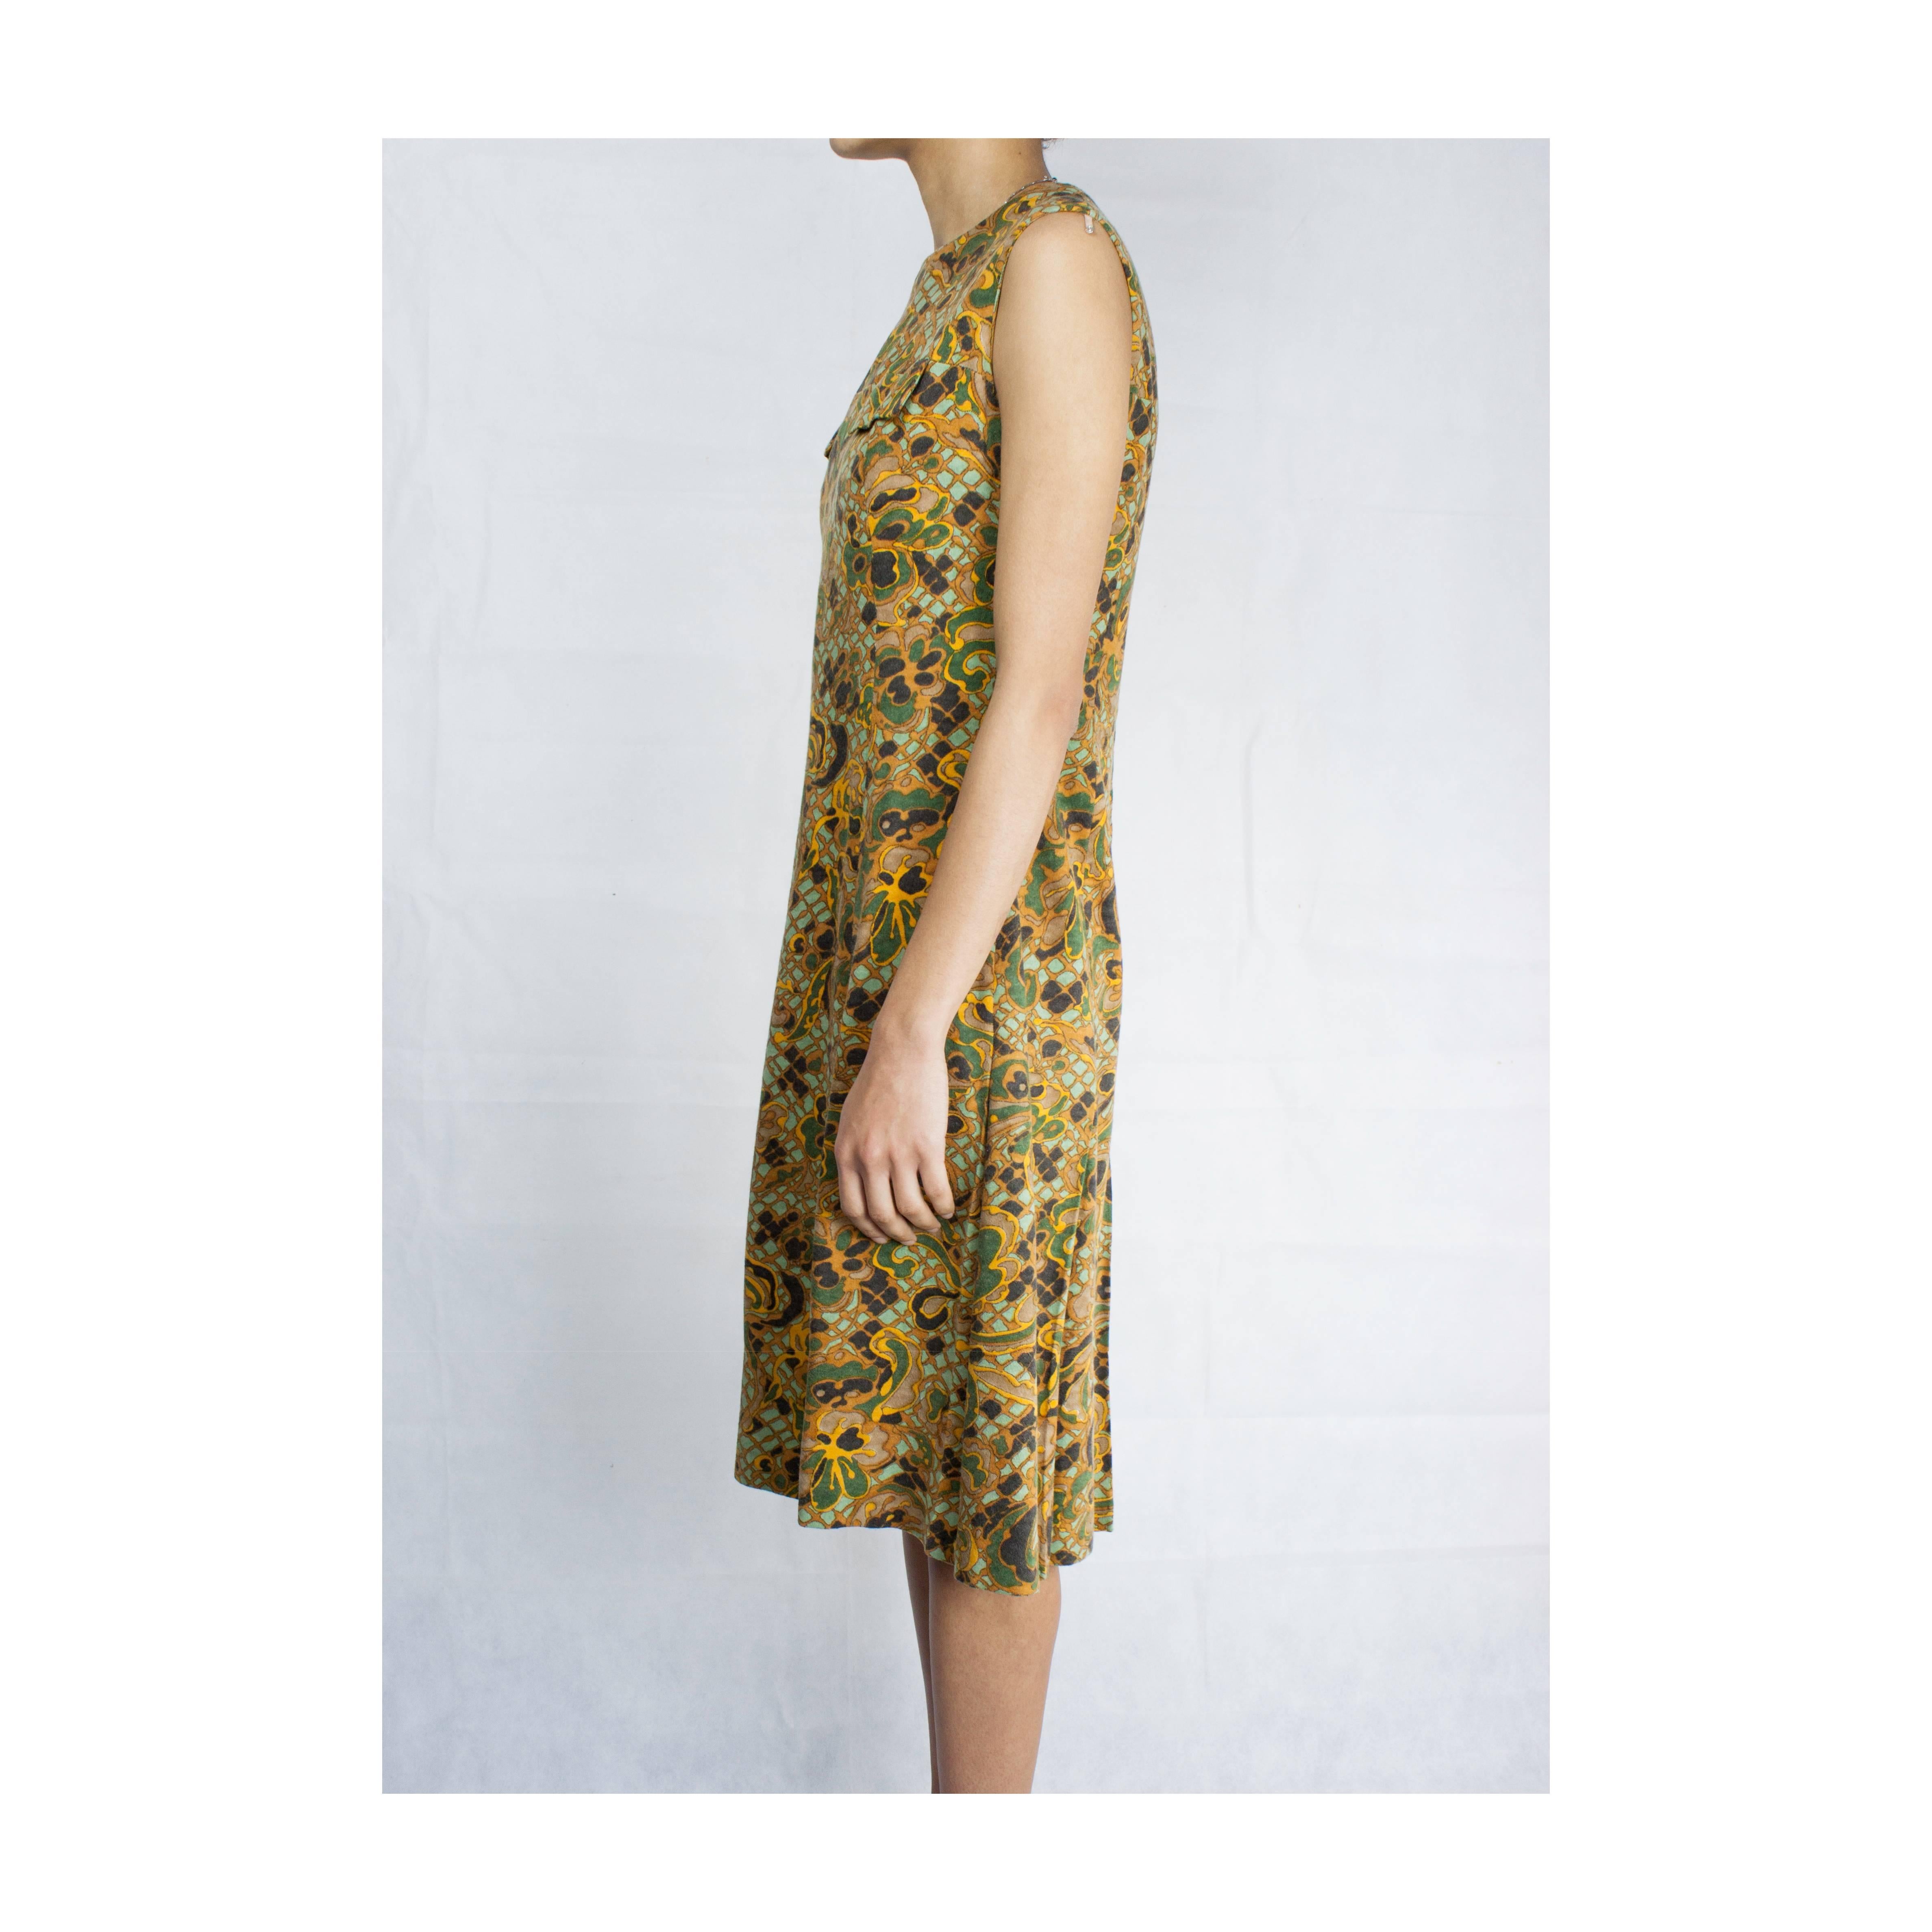 Jean Patou stylised floral motifs brushed wool dress, circa 1960s In Excellent Condition For Sale In London, GB